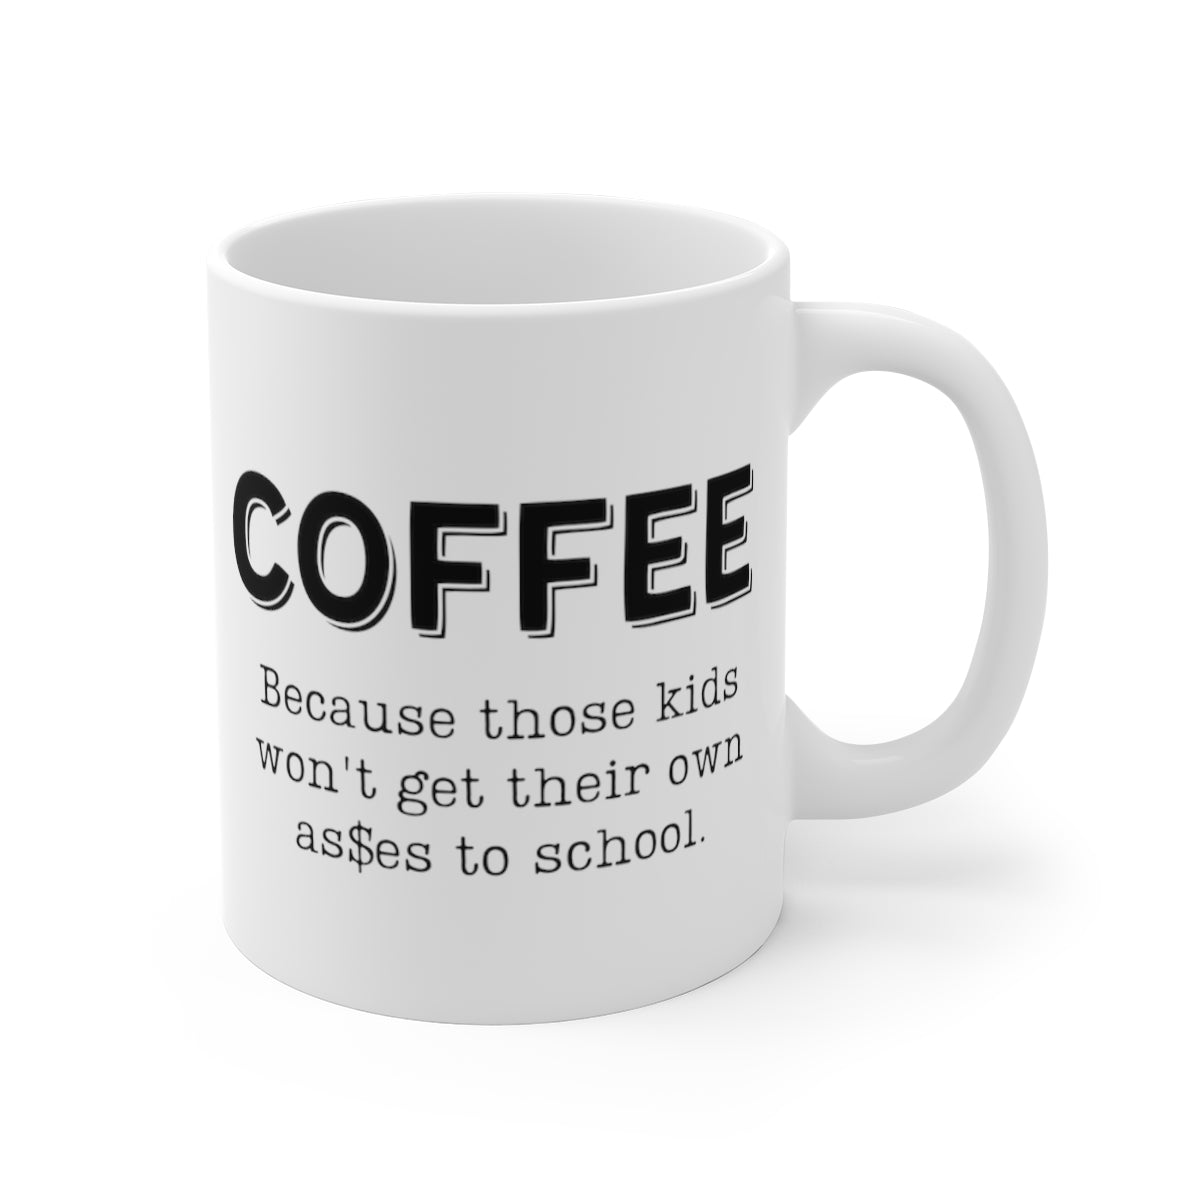 Coffee... Because Those Kids Won't Get Their Own As$es To School | Funny Coffee Mug, Snarky Gift for Parents | 11oz